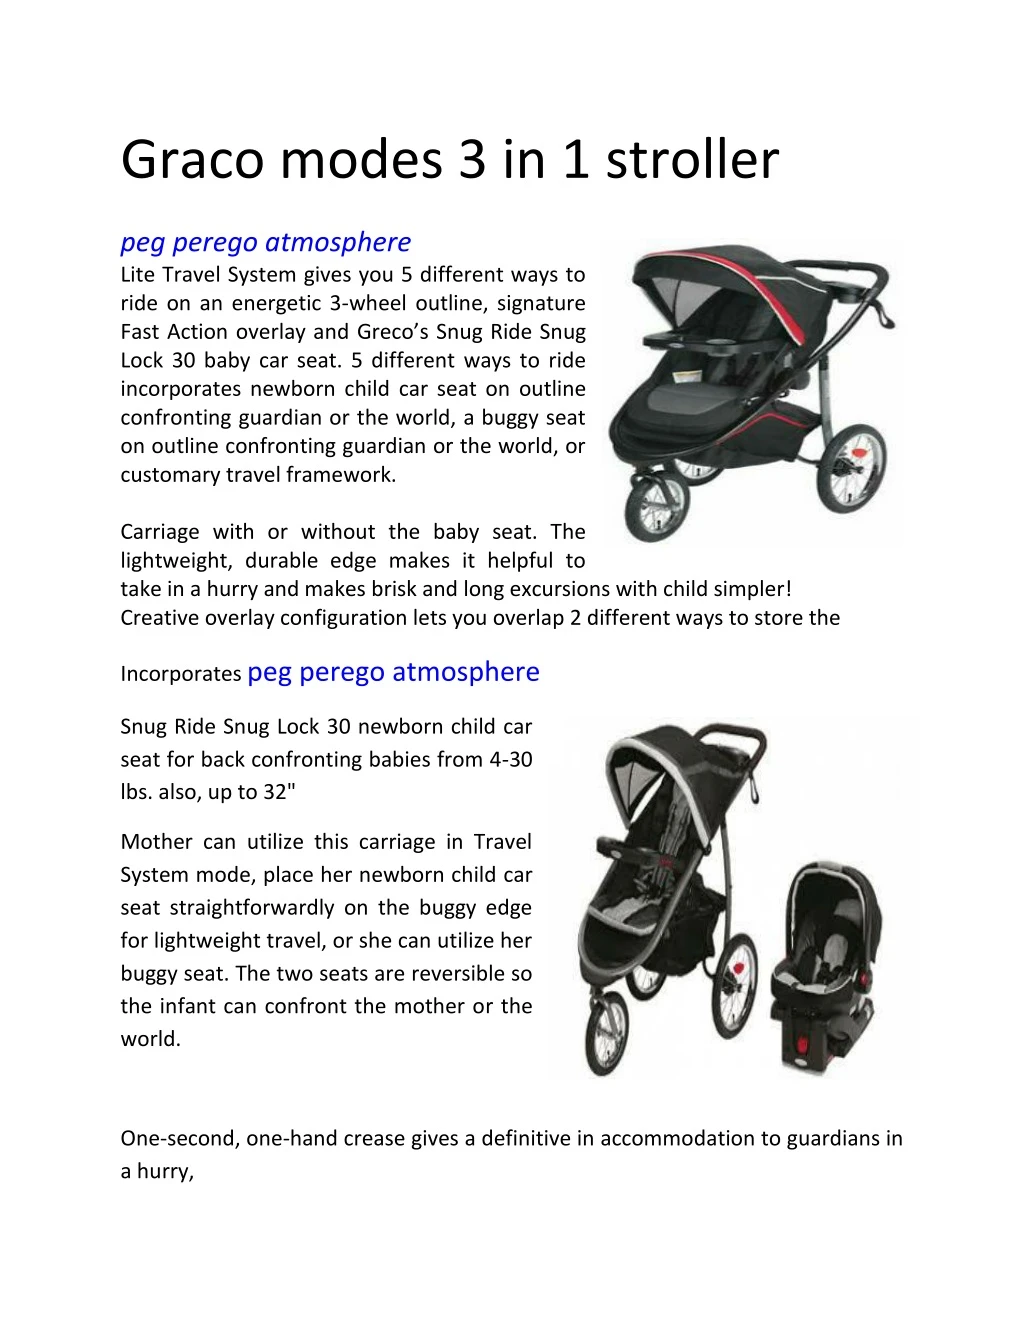 graco modes 3 in 1 stroller peg perego atmosphere